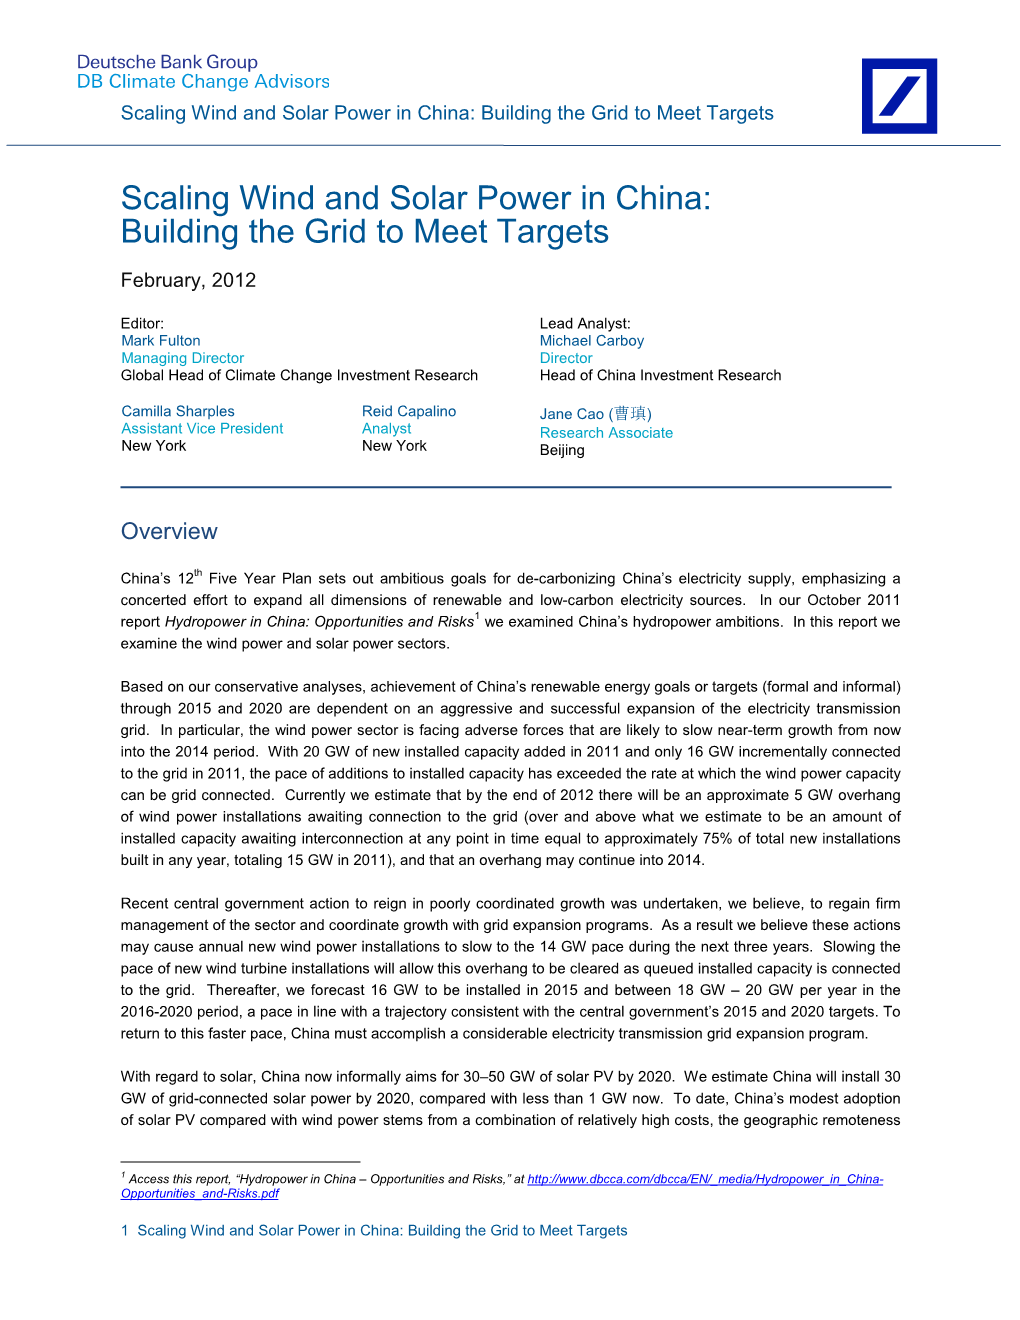 Scaling Wind and Solar Power in China: Building the Grid to Meet Targets